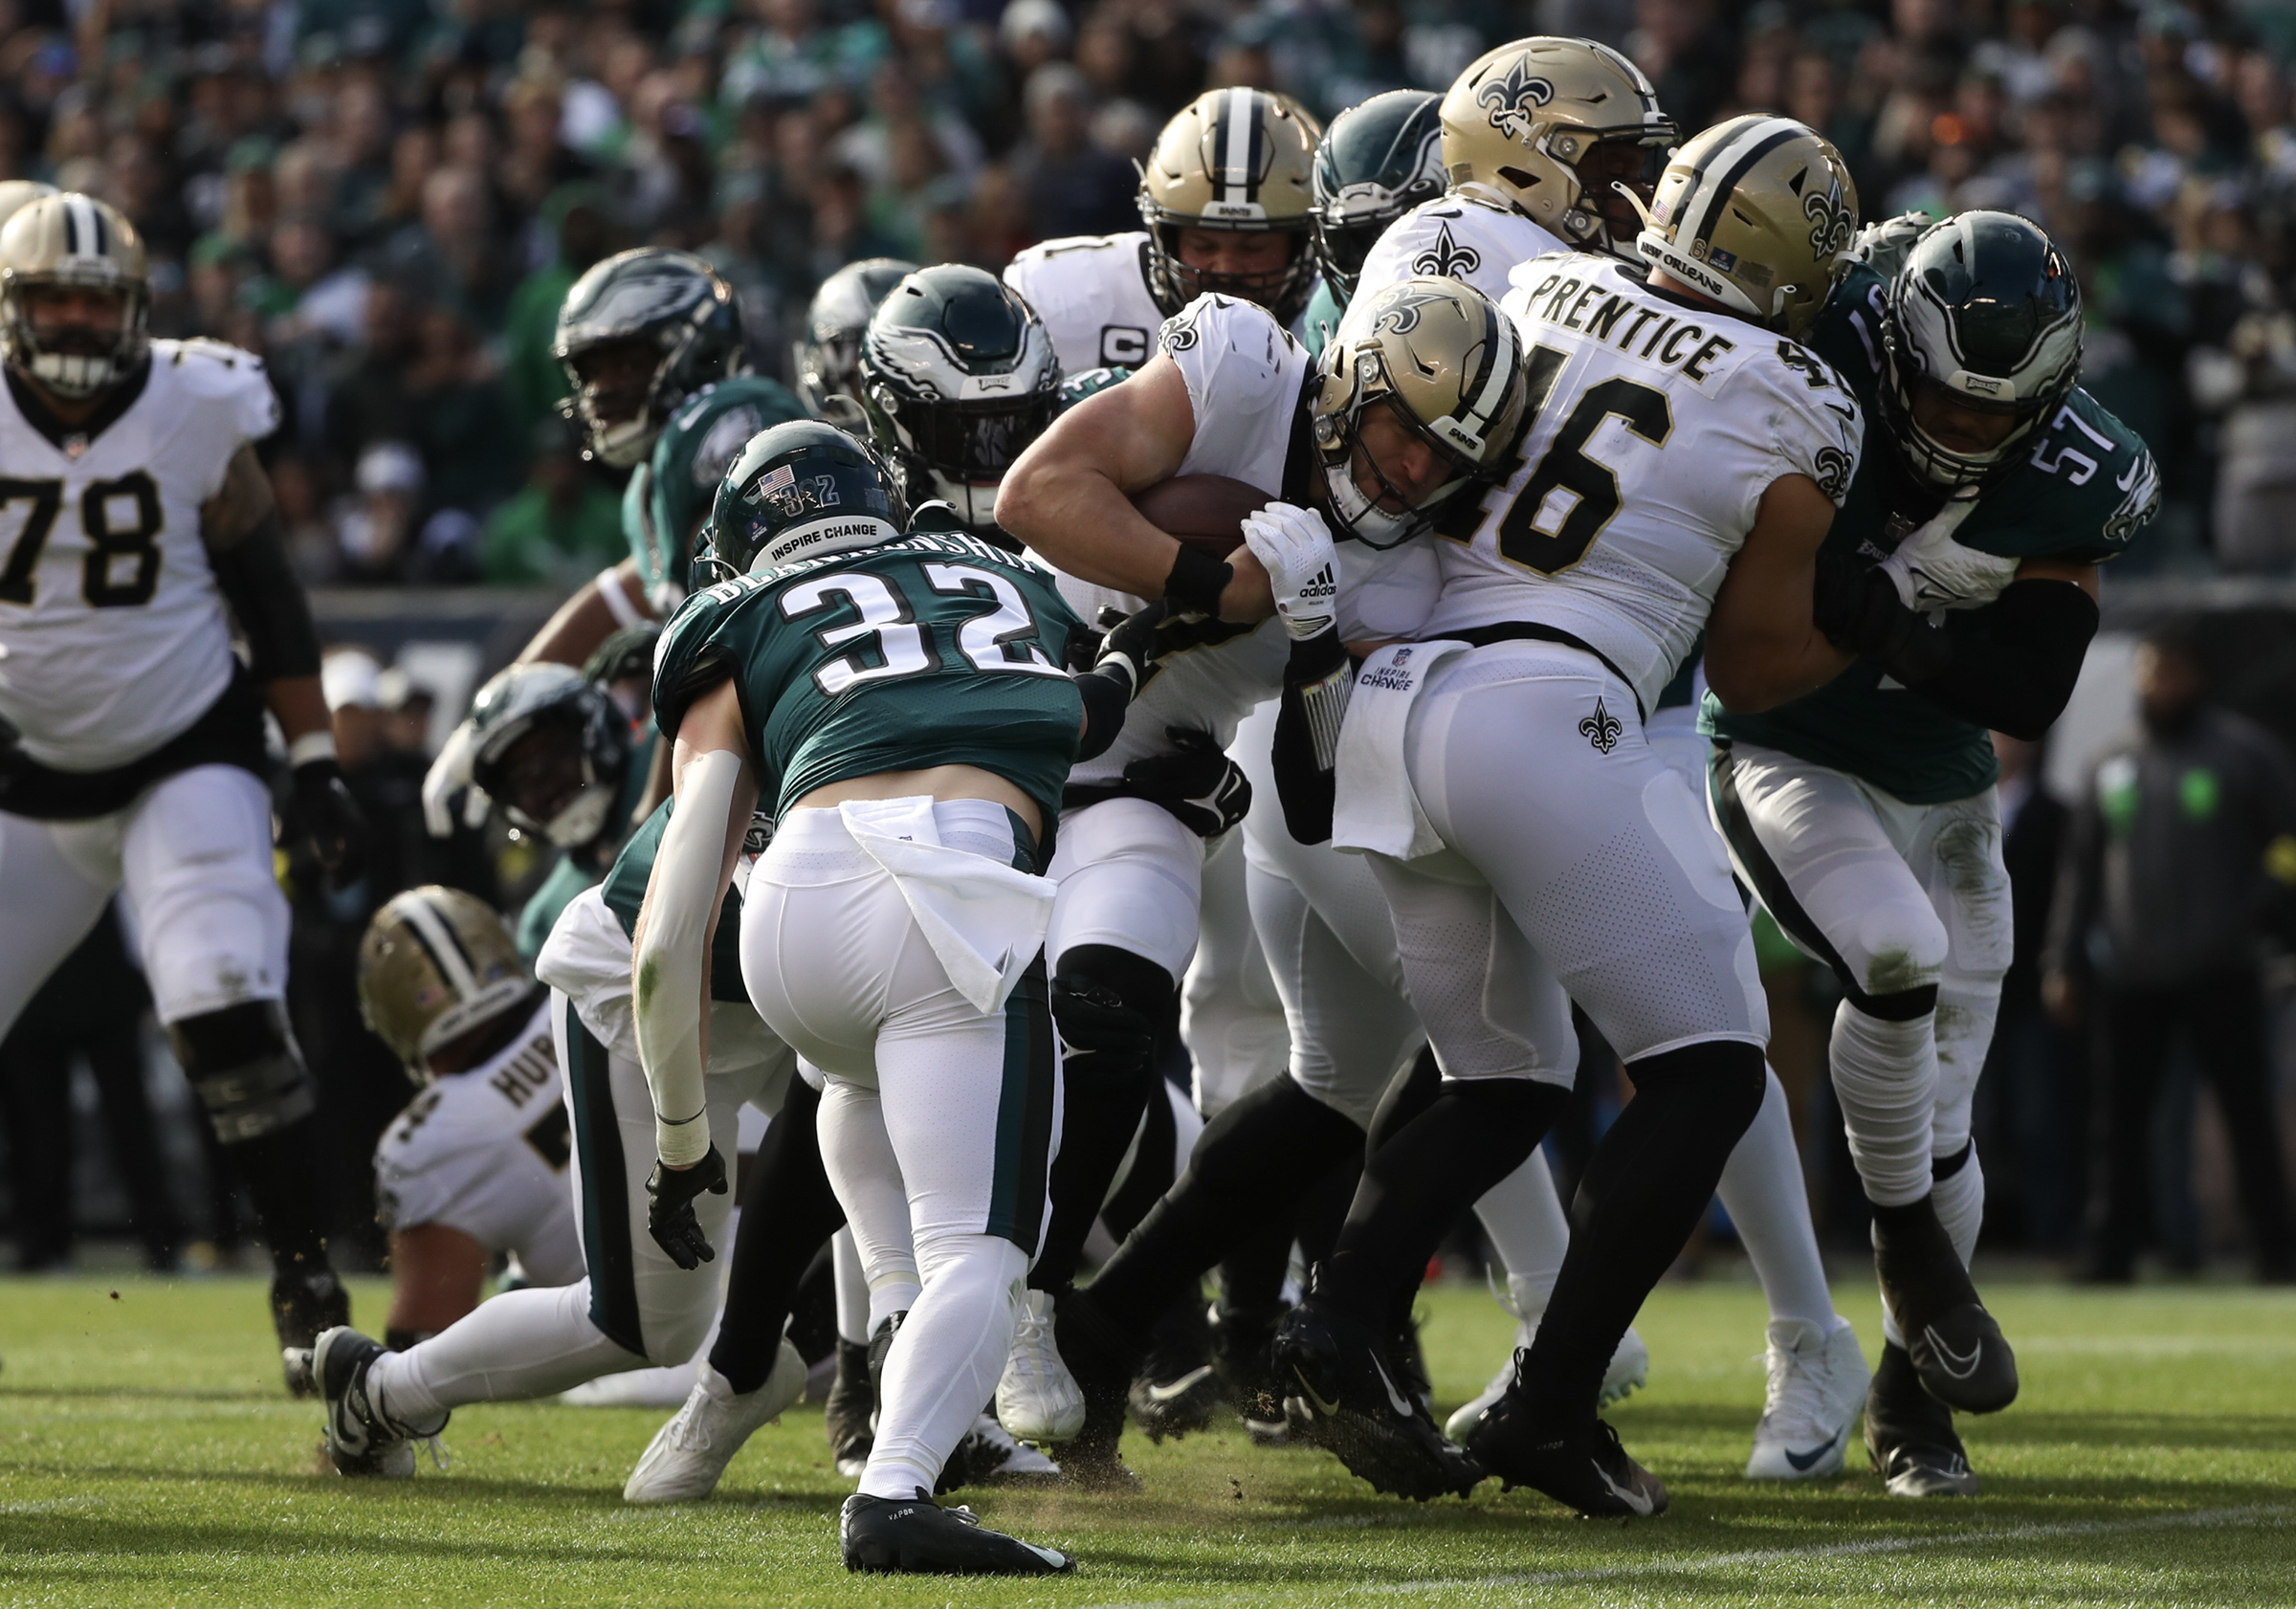 Photos from the Eagles' NFL Week 17 loss to the Saints